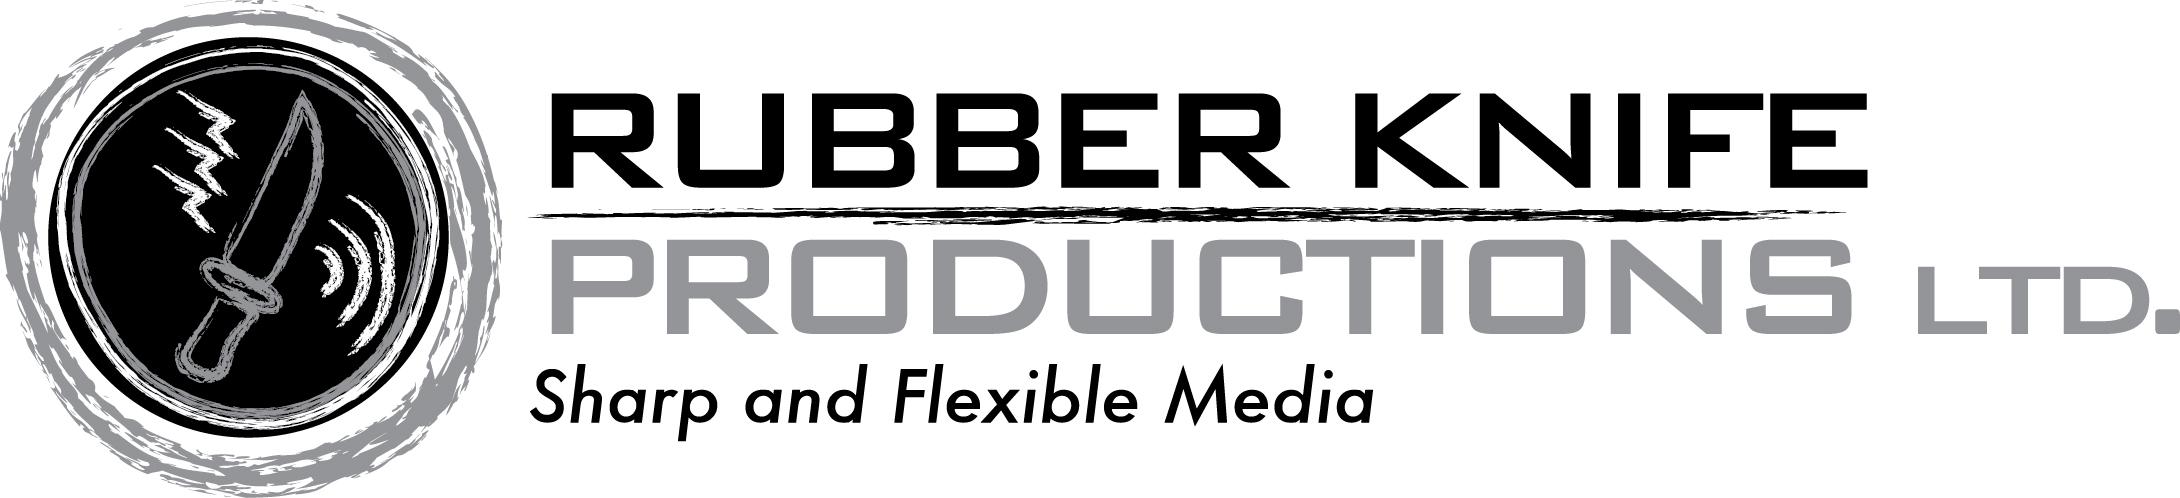 Rubber Knife Productions profile on Qualified.One